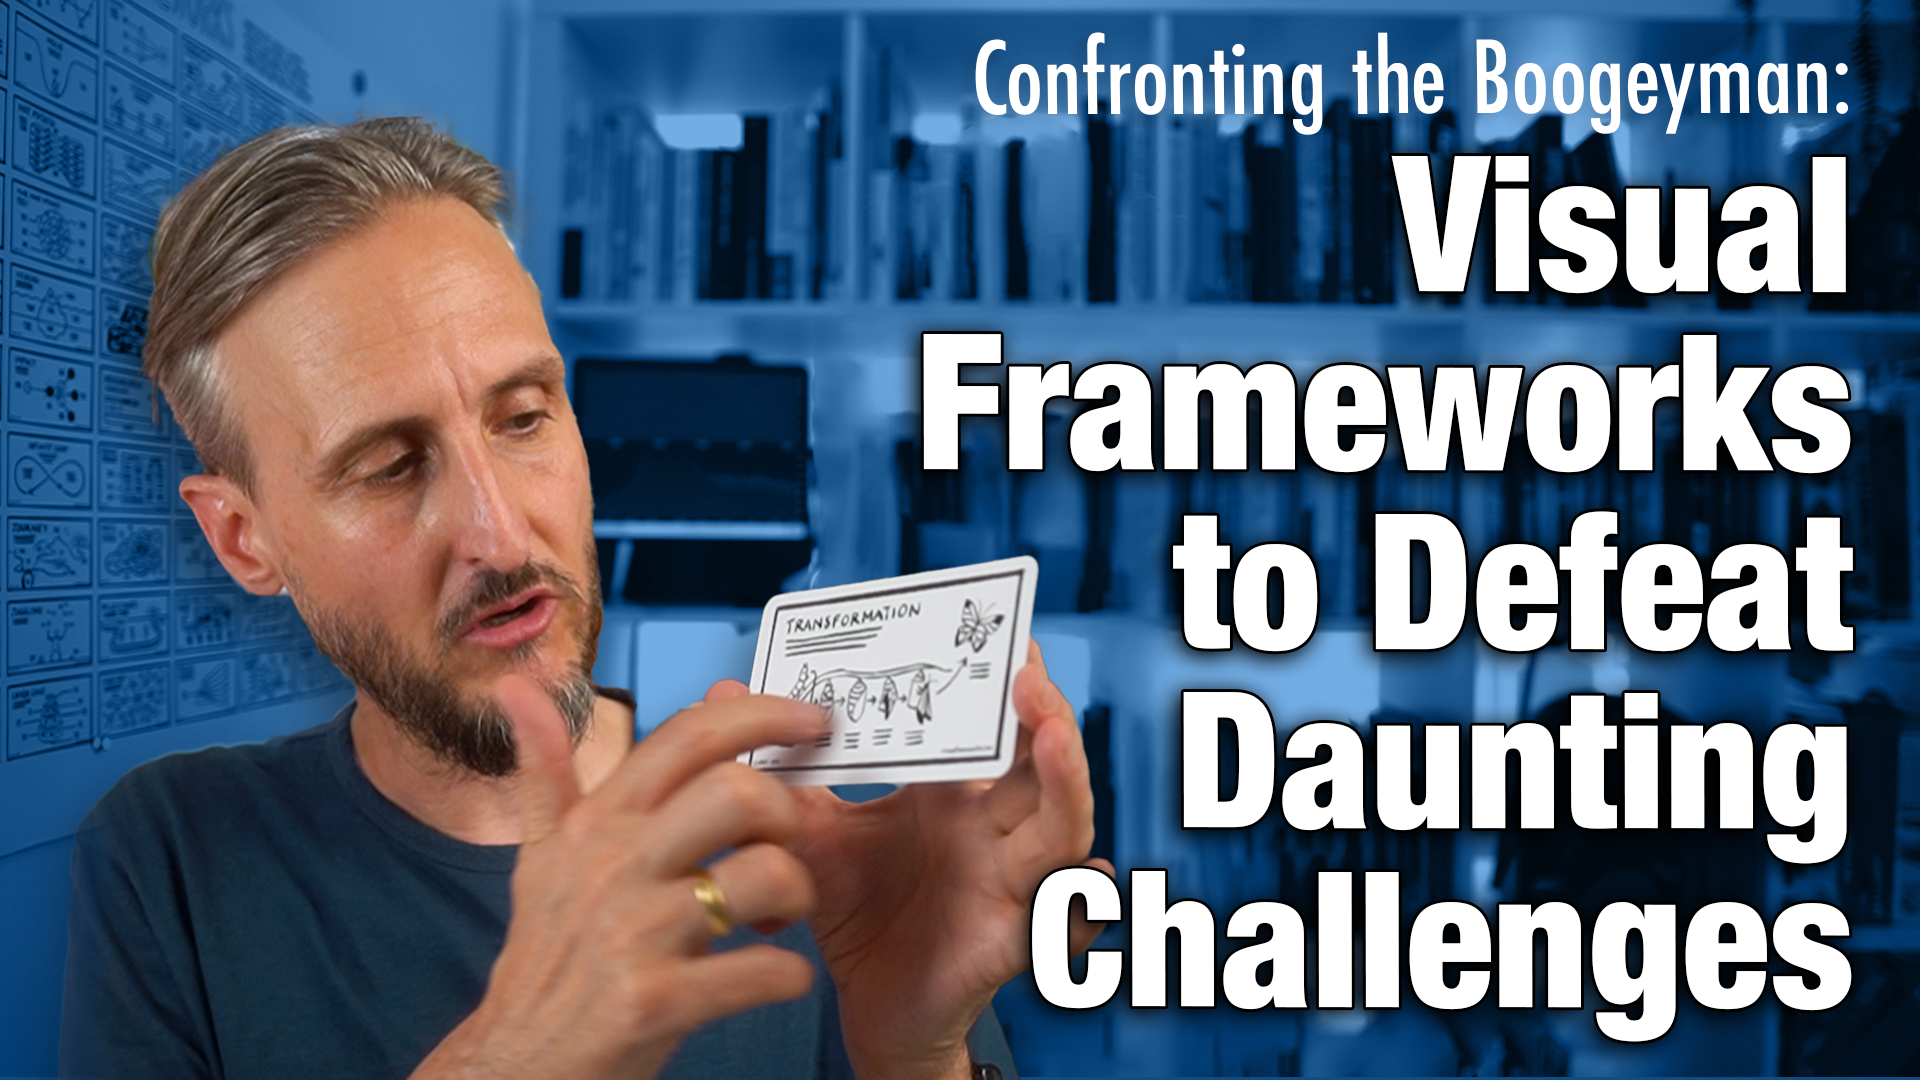 Confronting the Boogeyman: Visual Frameworks to Defeat Daunting Challenges